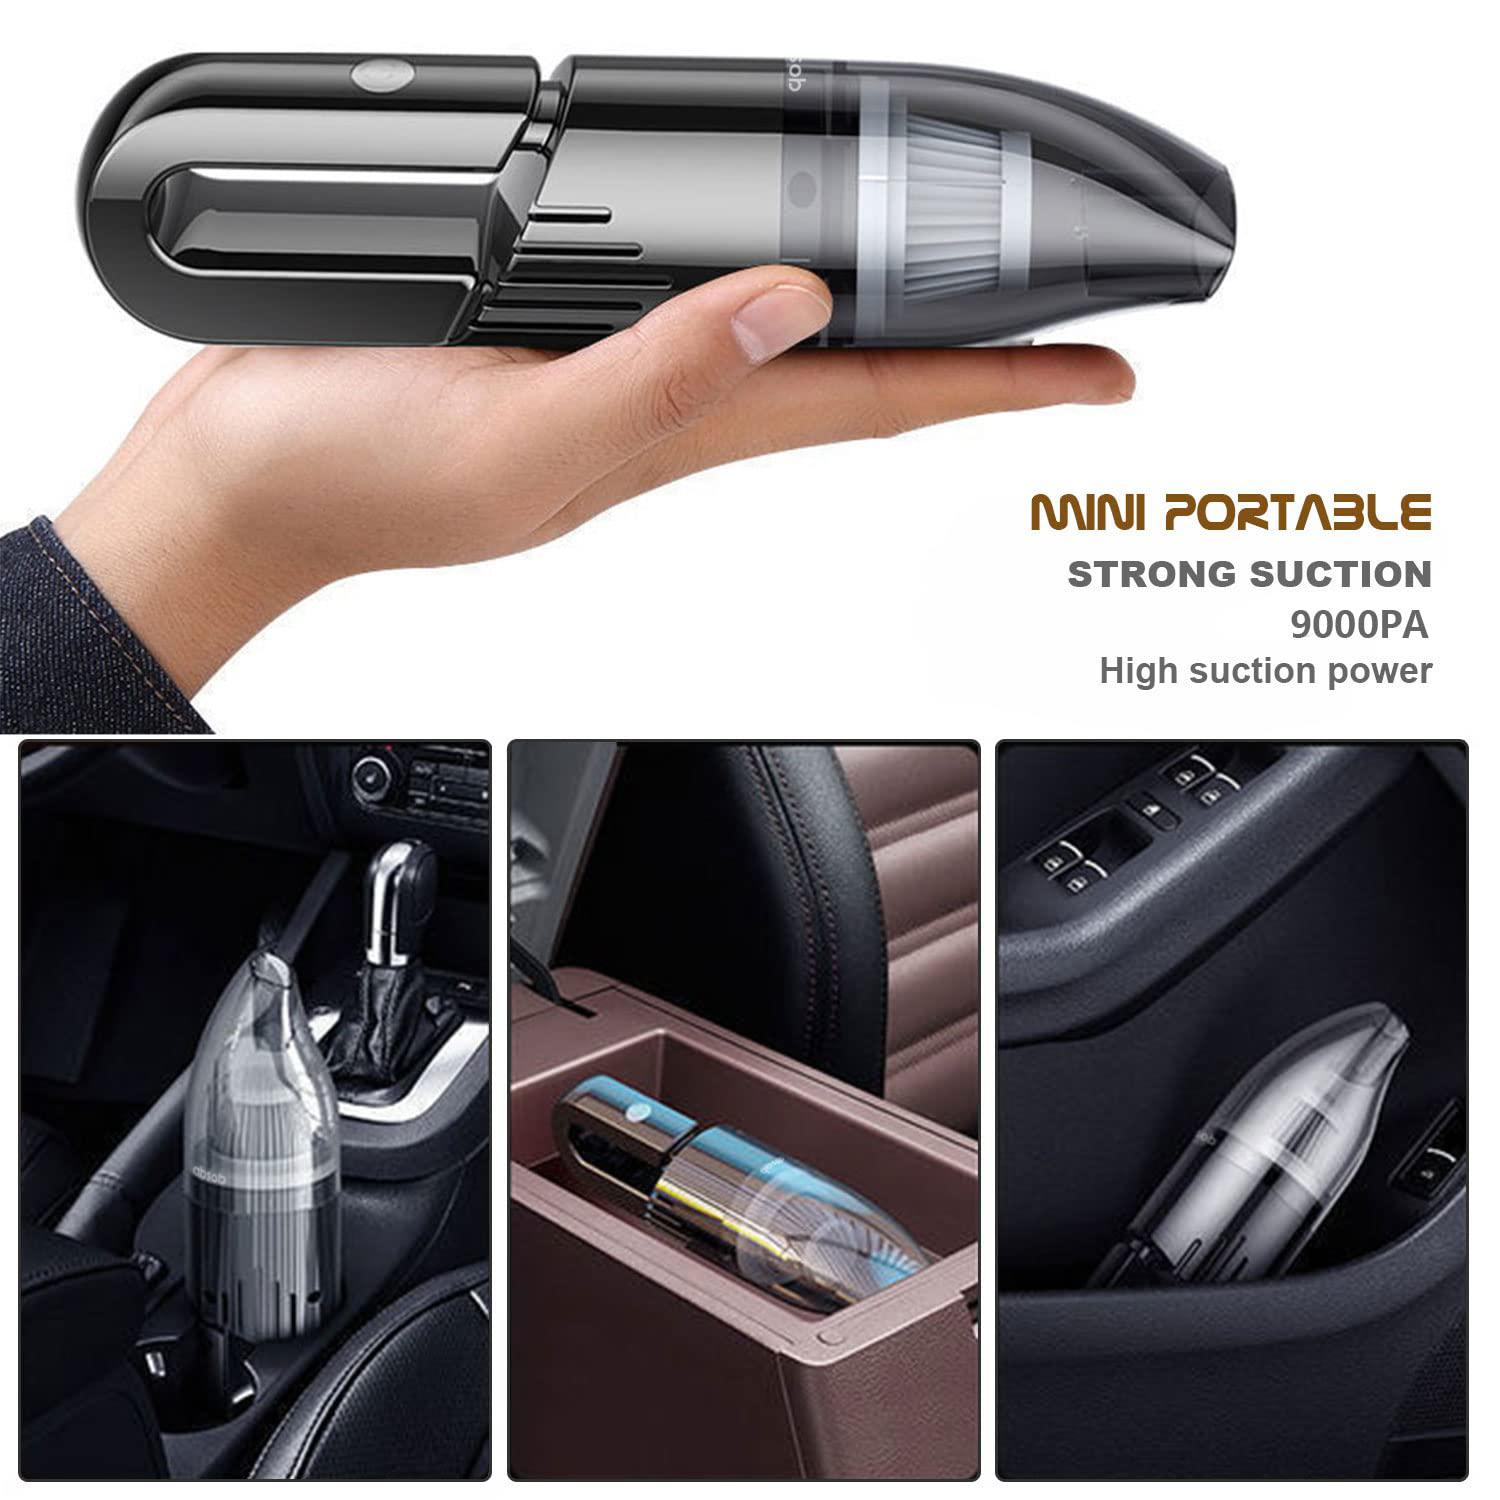 absob handheld vacuum cleaner cordless, mini portable car hand vacuum cleaner, powerful suction hand vac, rechargeable lightw